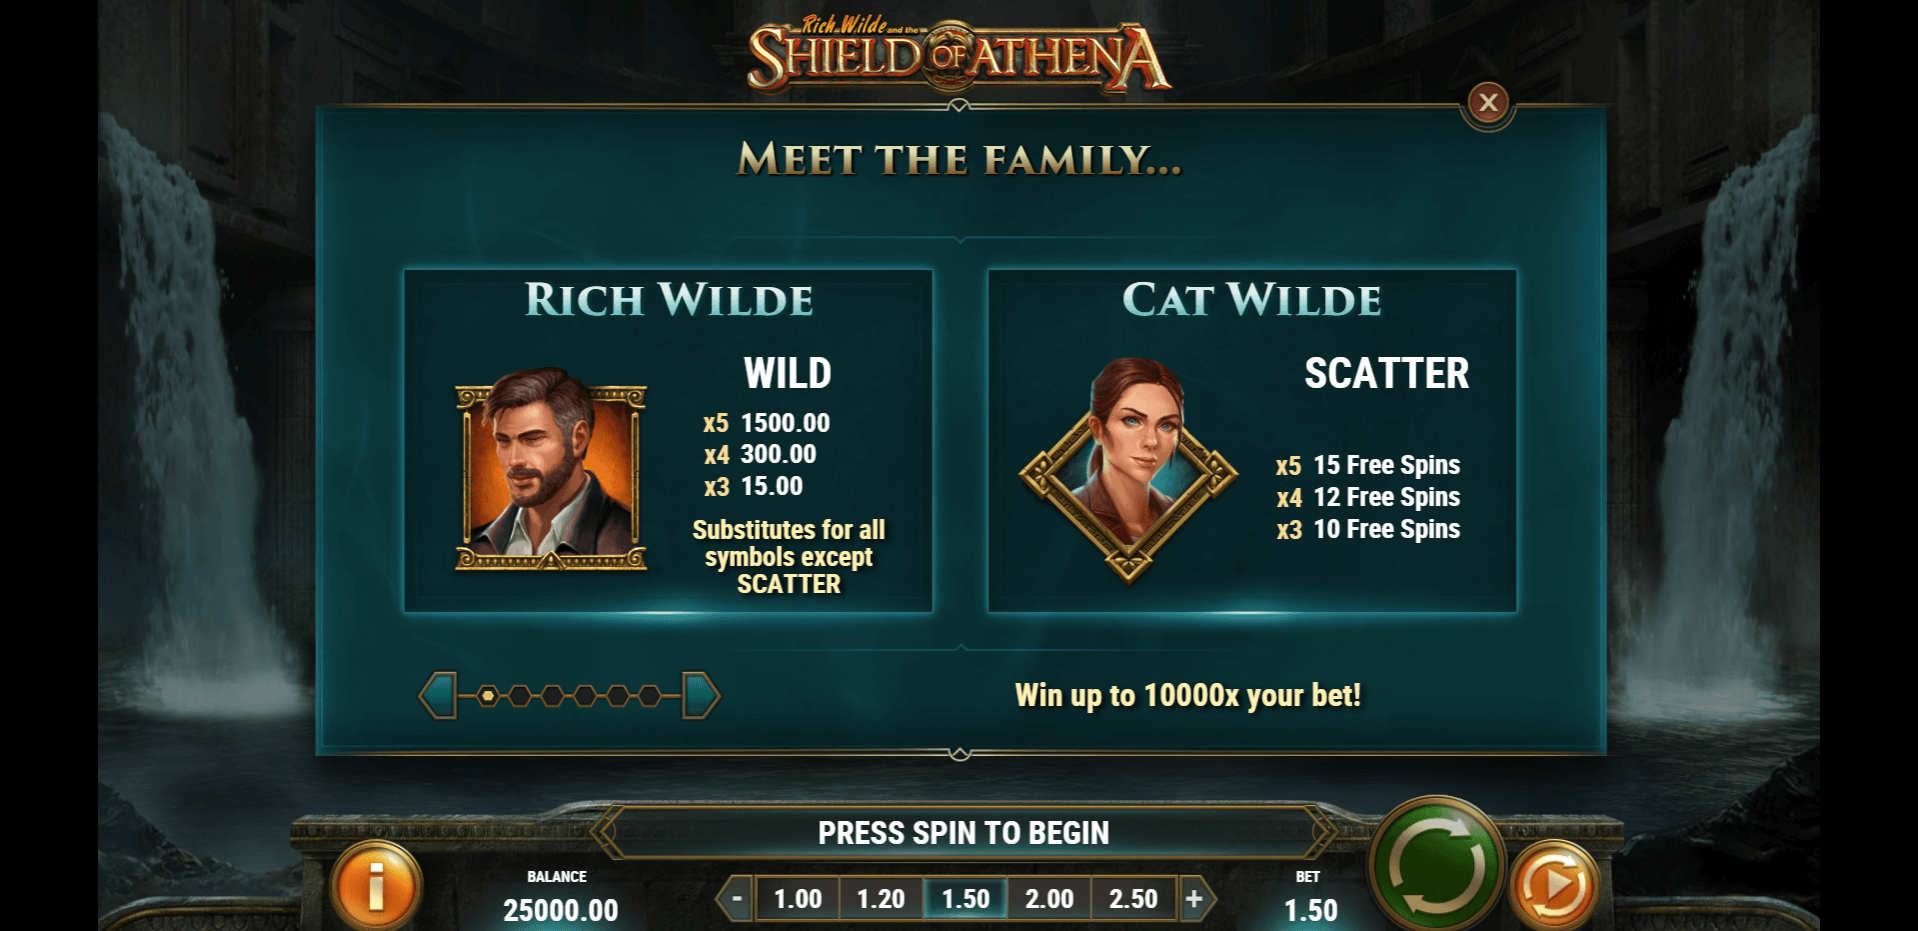 rich wilde and the shield of athena slot machine detail image 0